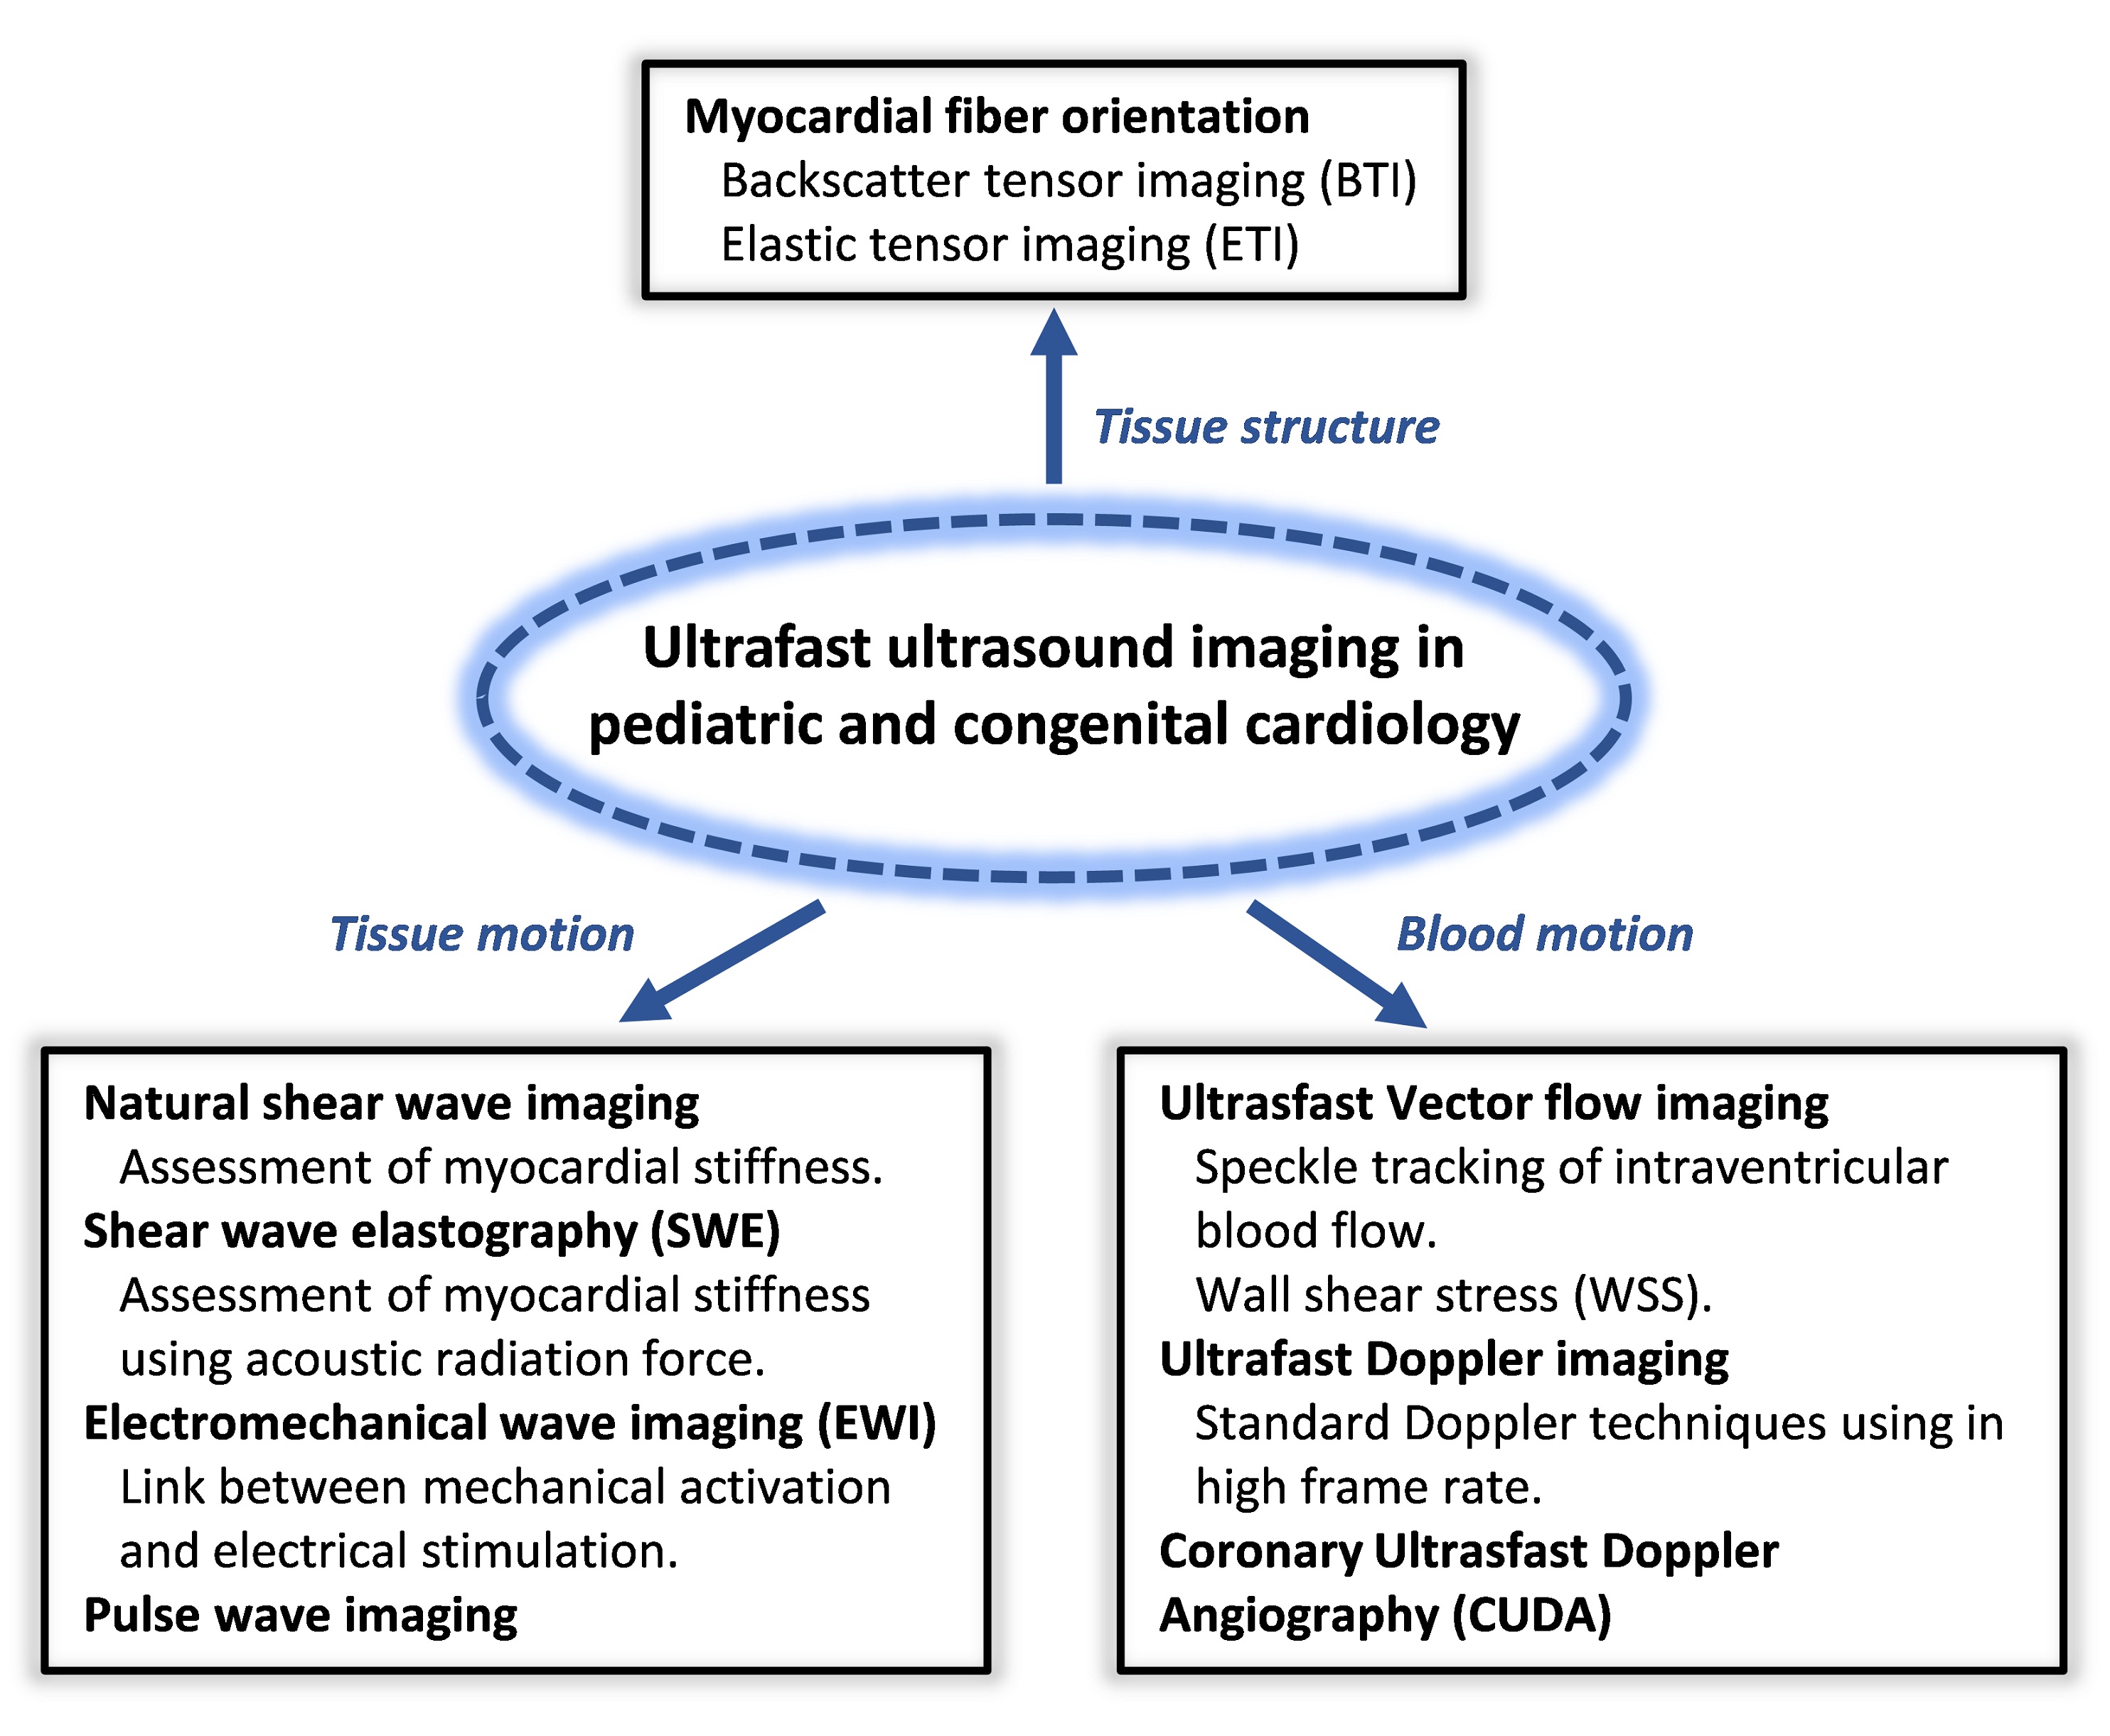 Possible applications of Ultrafast Ultrasound Imaging in pediatric cardiology